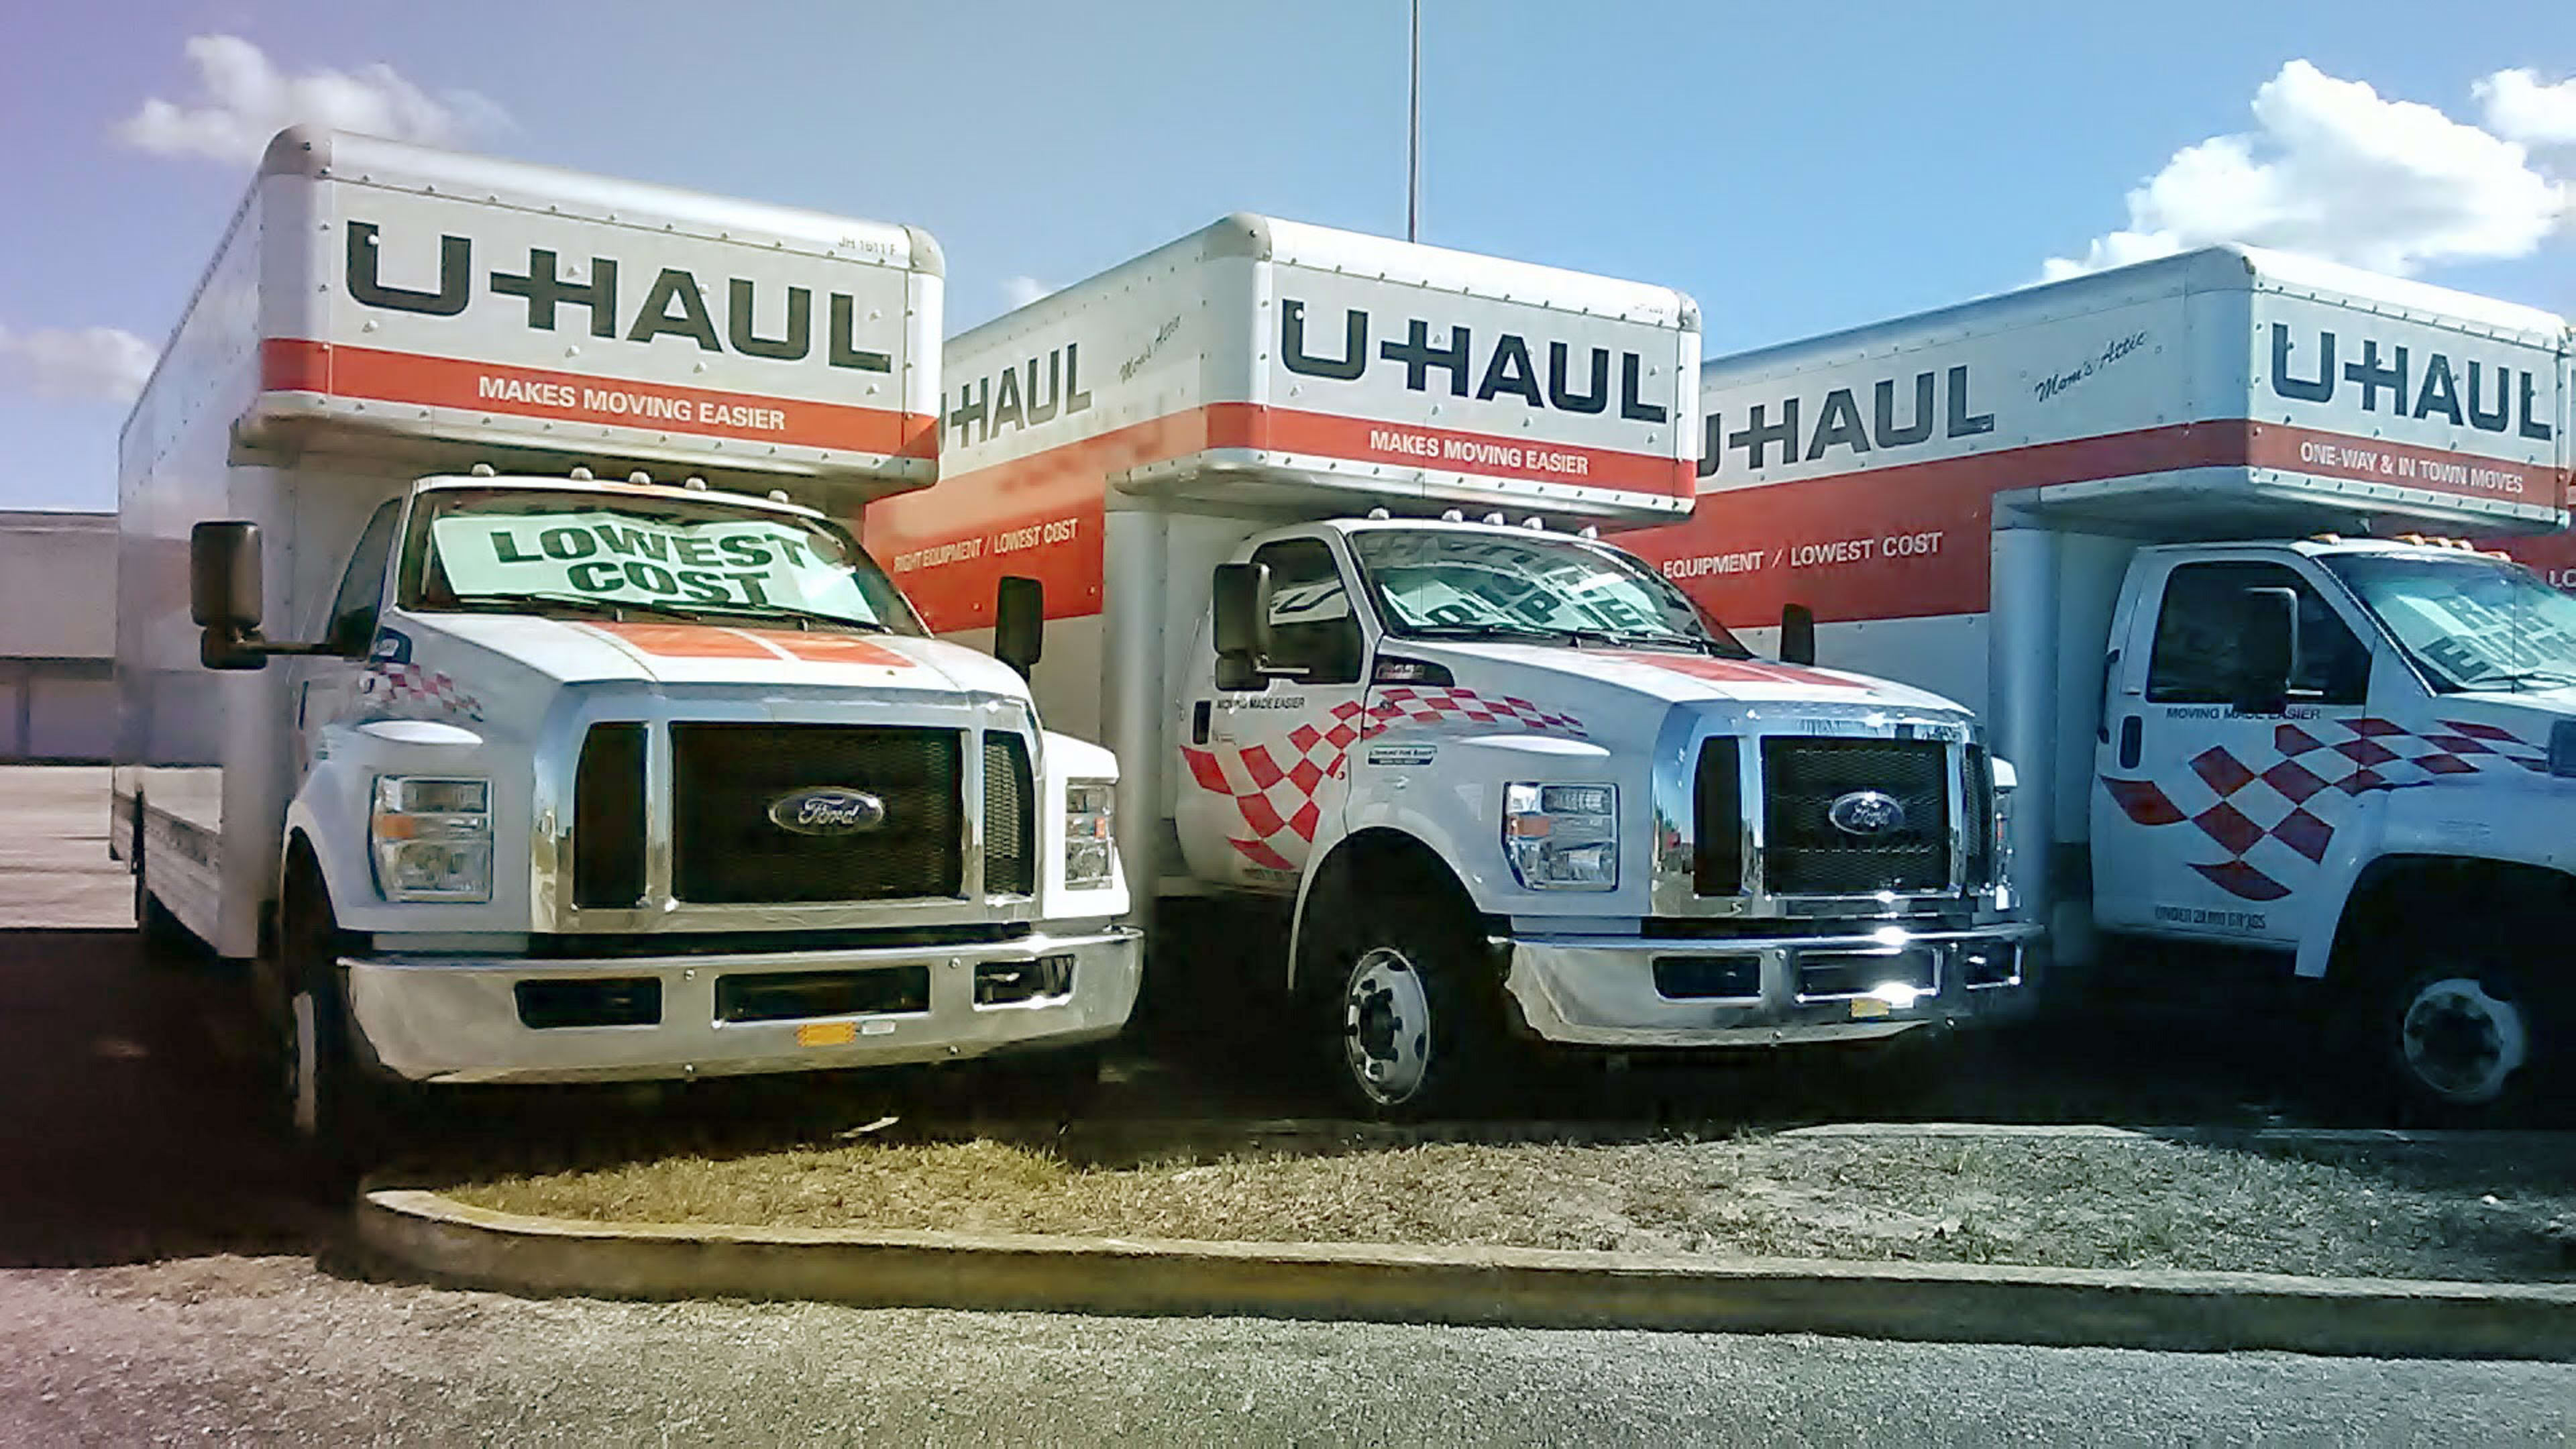 People fleeing the Bay Area are causing a U-Haul crisis